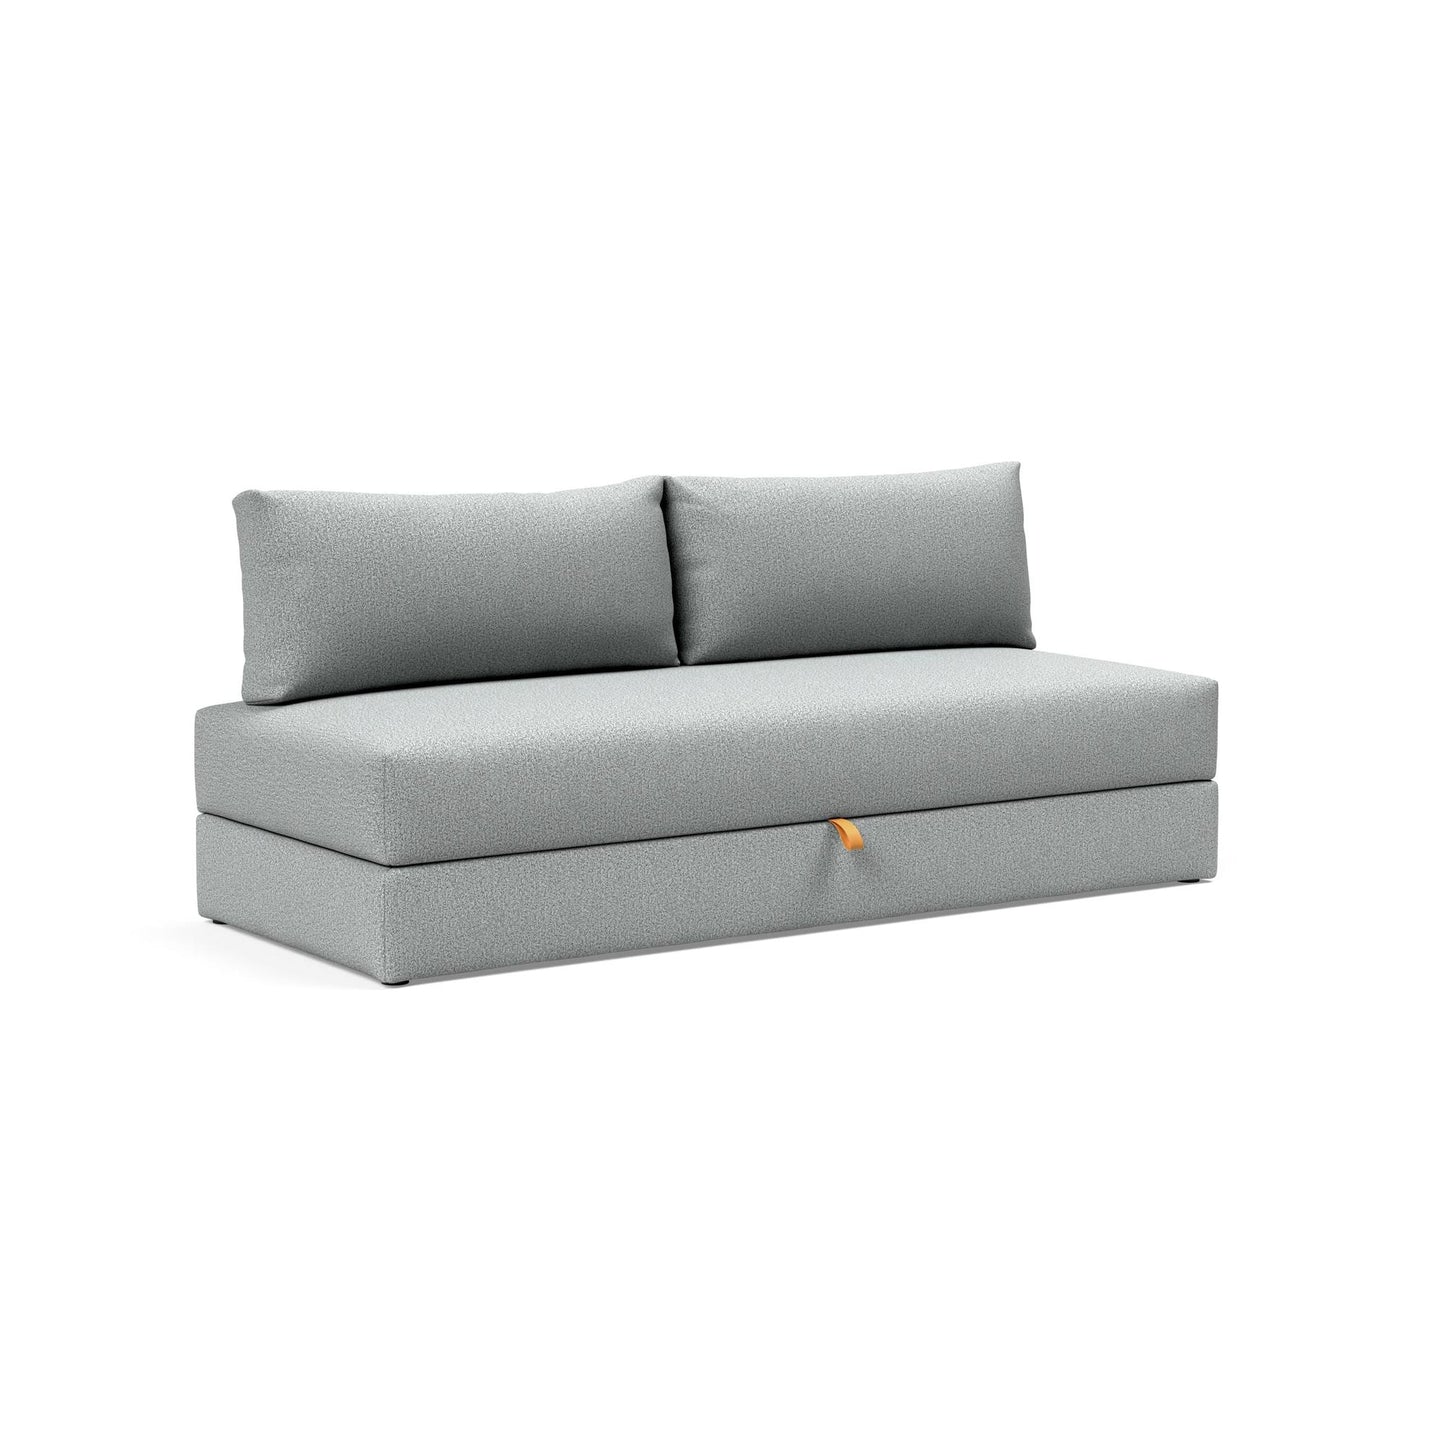 Walis Daybed Sofa Bed in Melange Light Gray